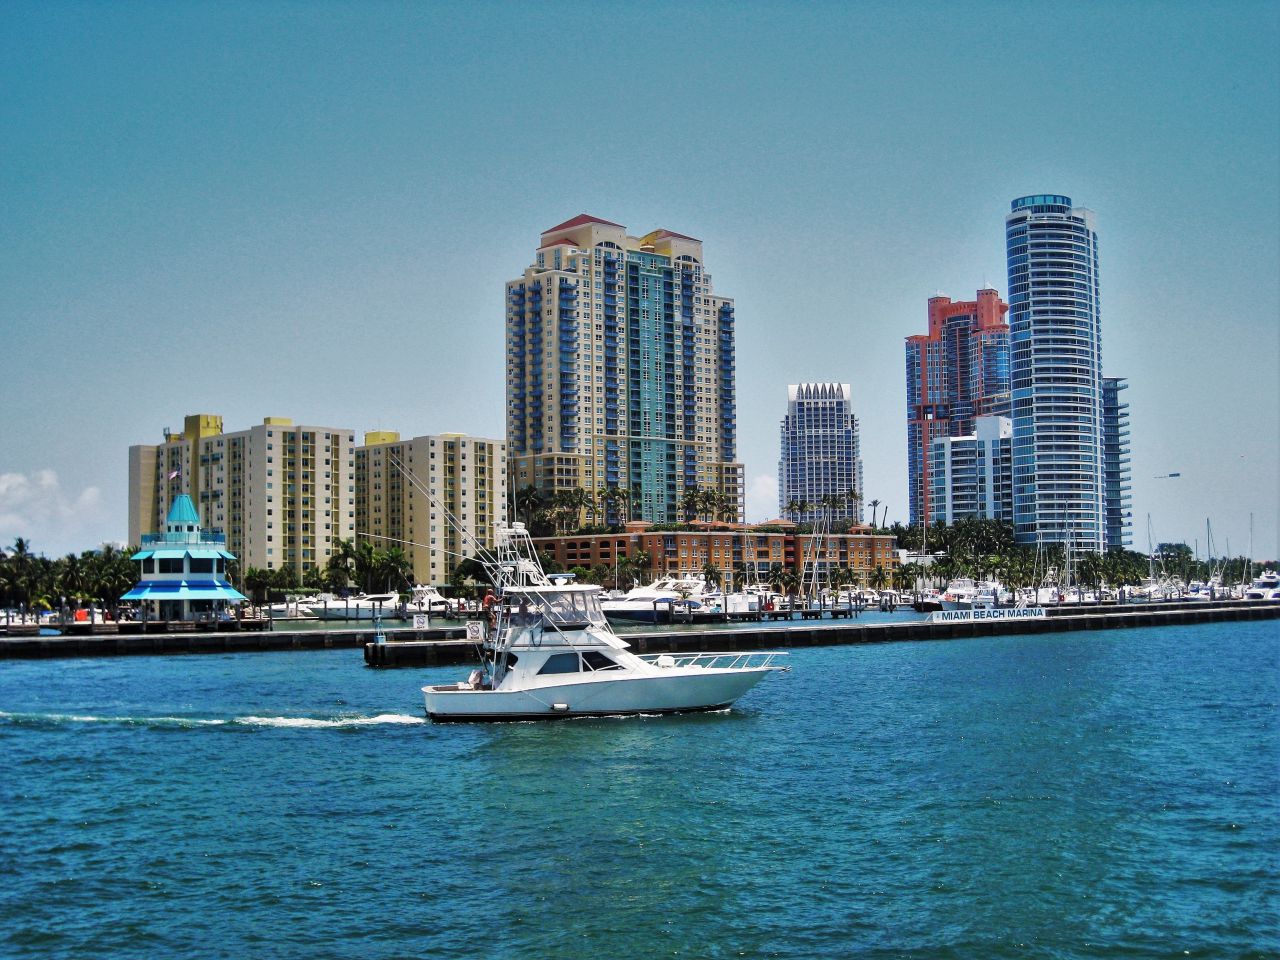 A view of the Miami skyline from the river during the day.